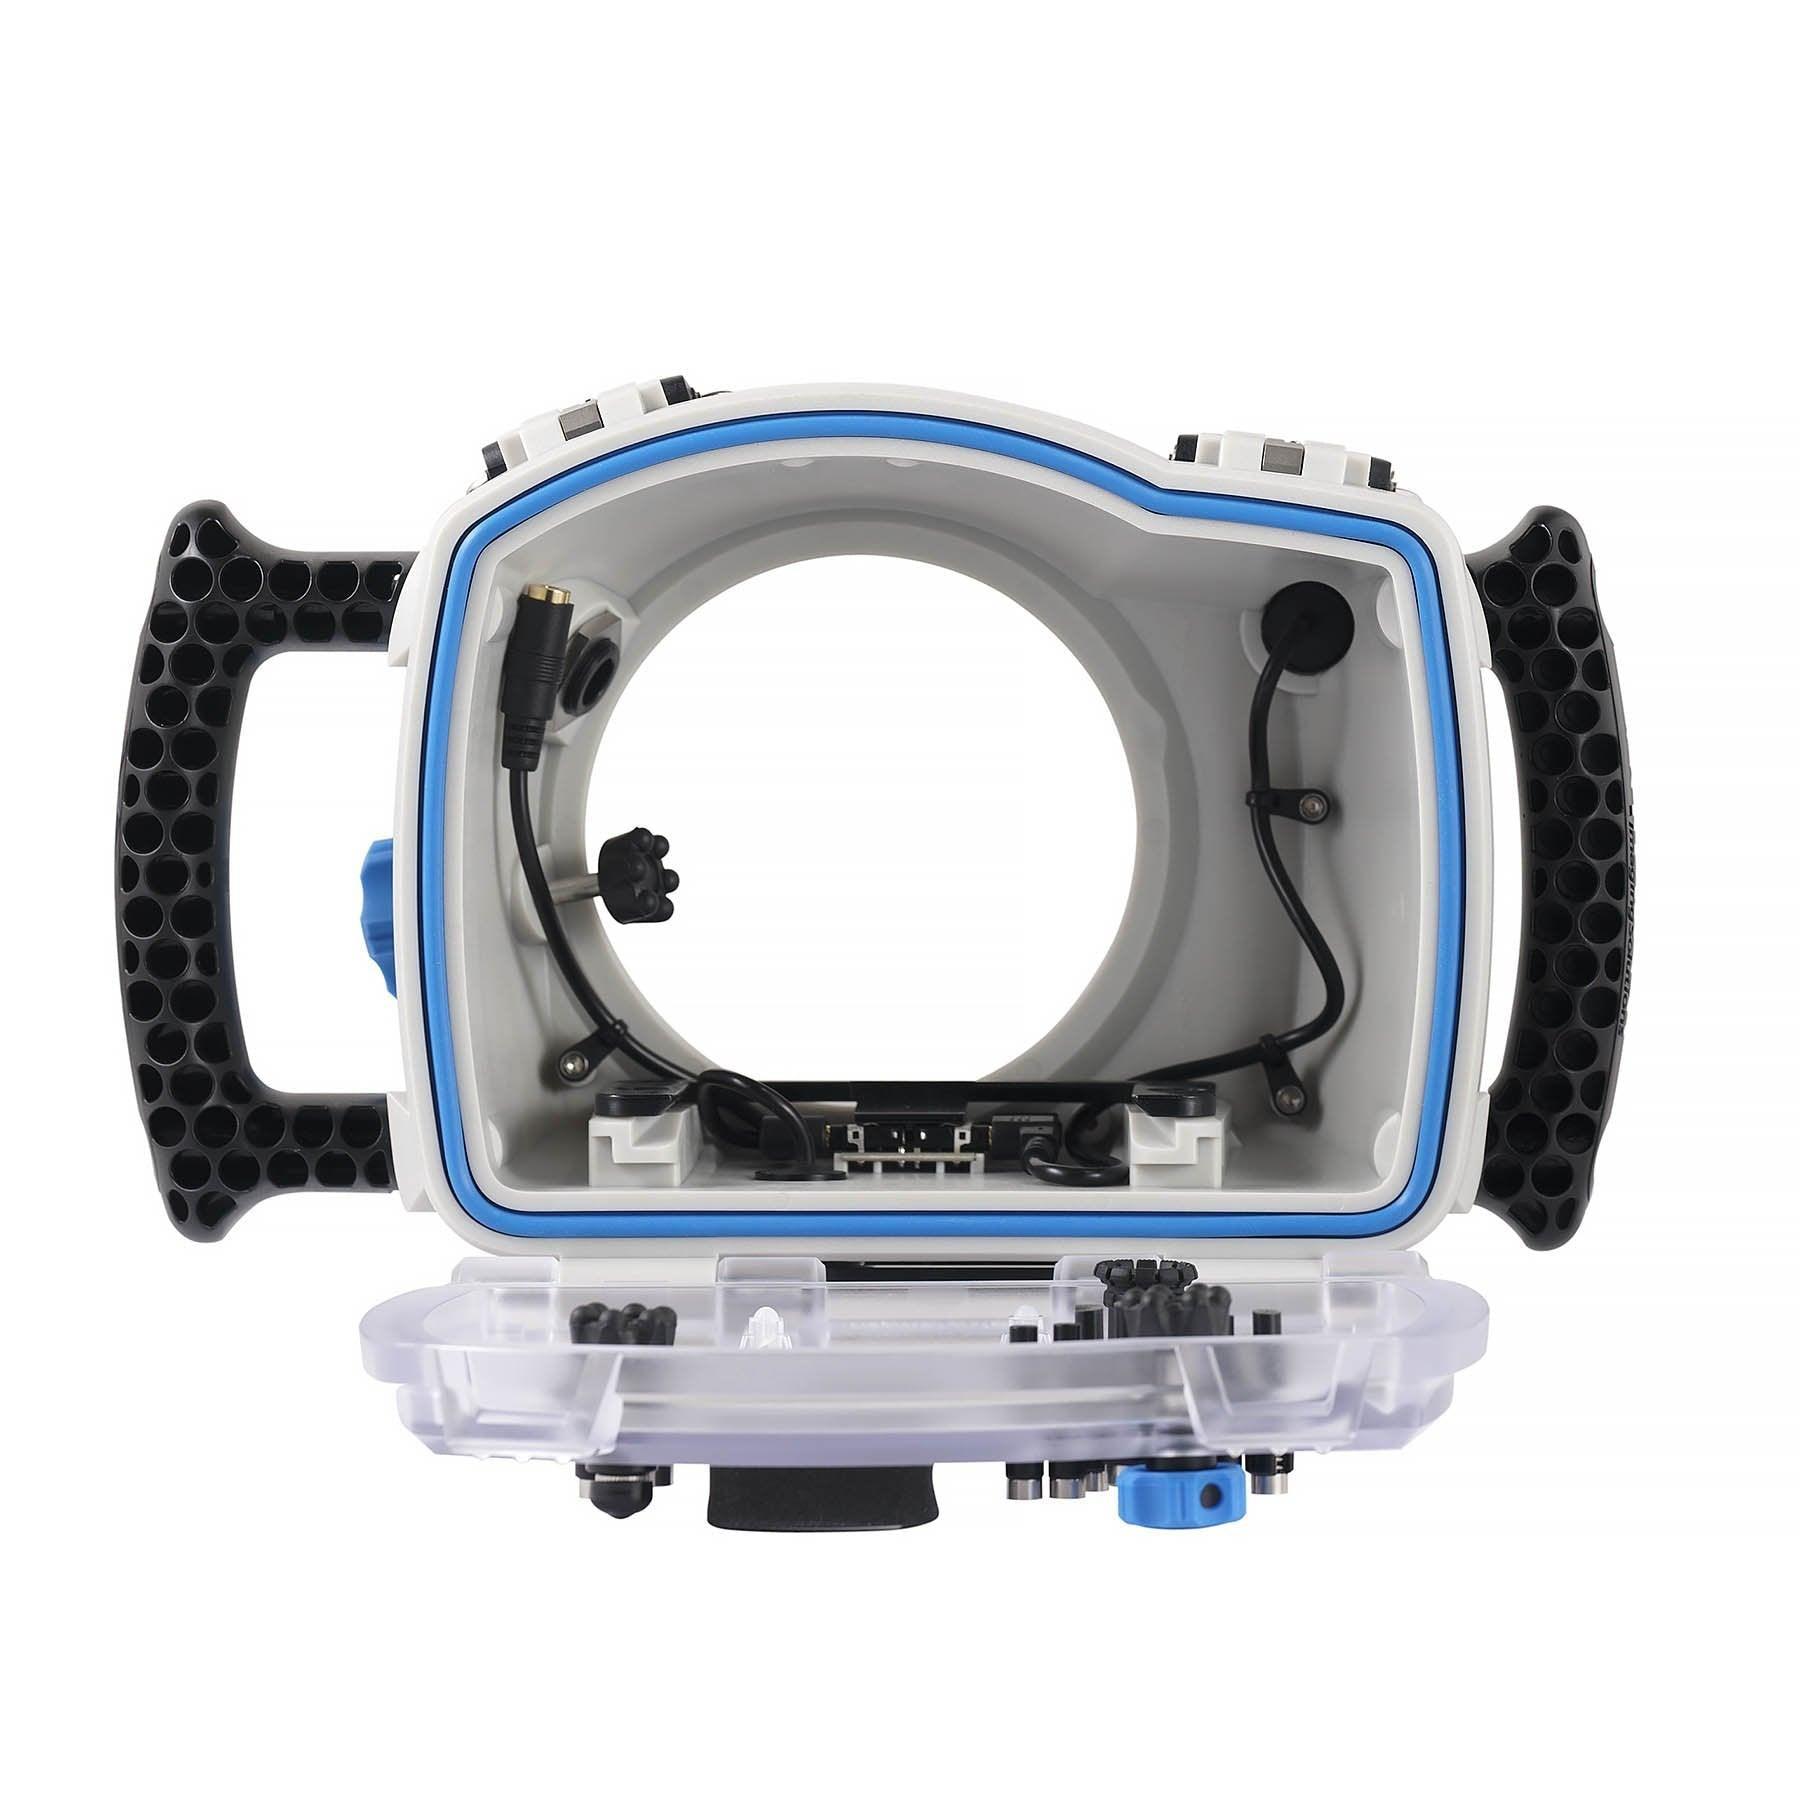 Equinox HD Underwater Housing for JVC GZ-HD7 Camcorder Depth Rating:  250' 75 m